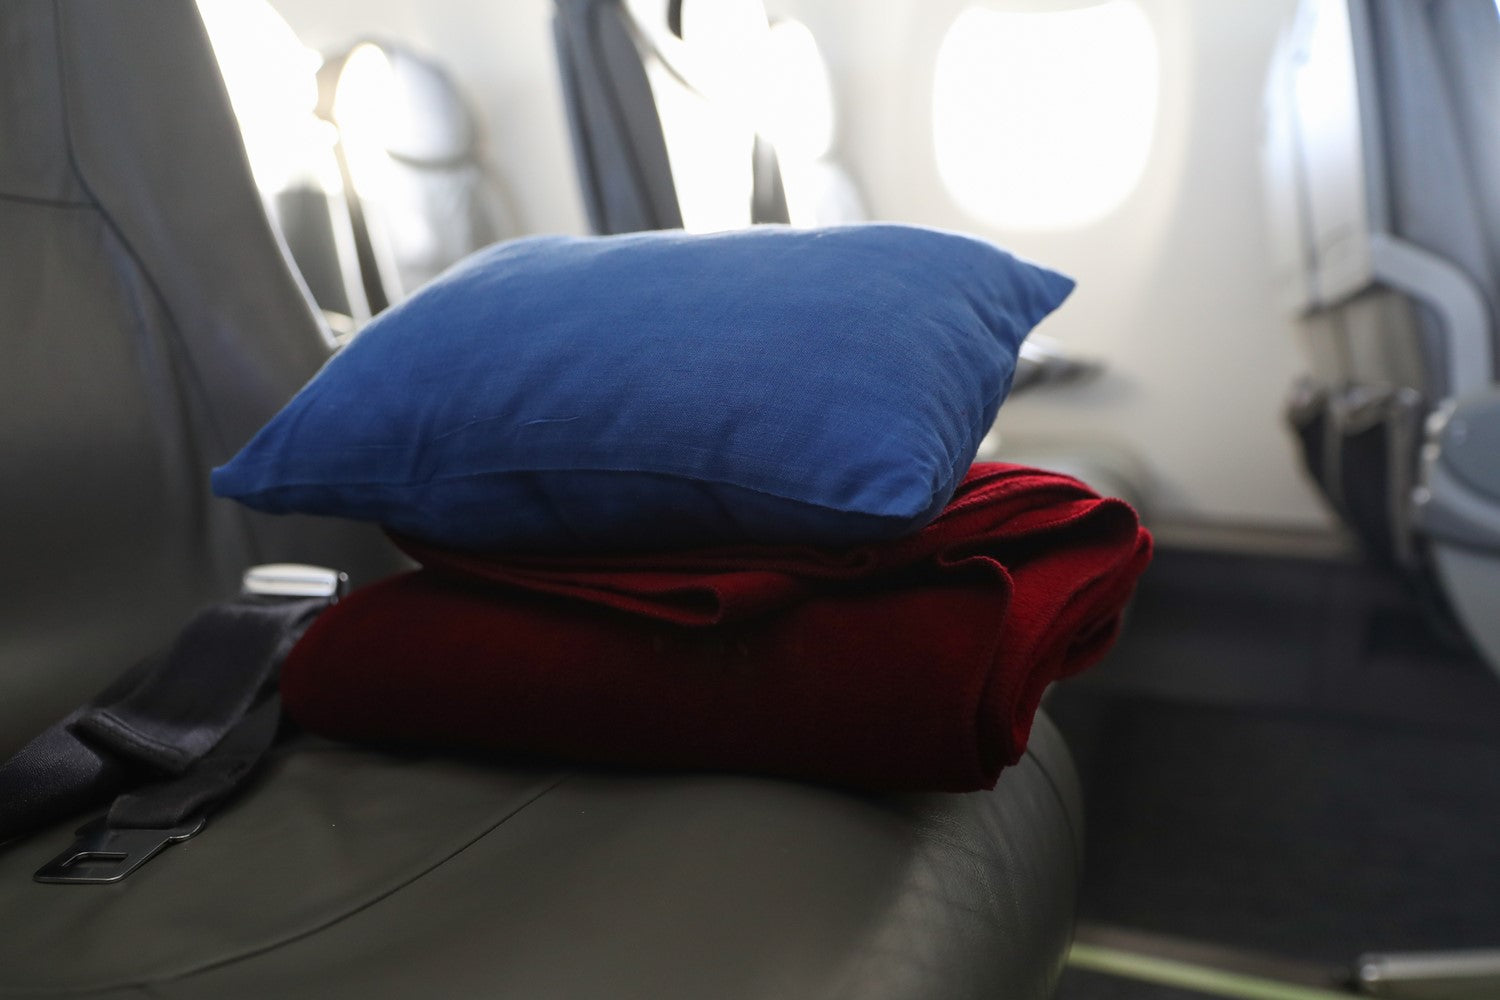 shoppers swear this seat cushion that's on sale makes sitting in  airplane seats more comfortable: 'Gave me the comfort and support I needed